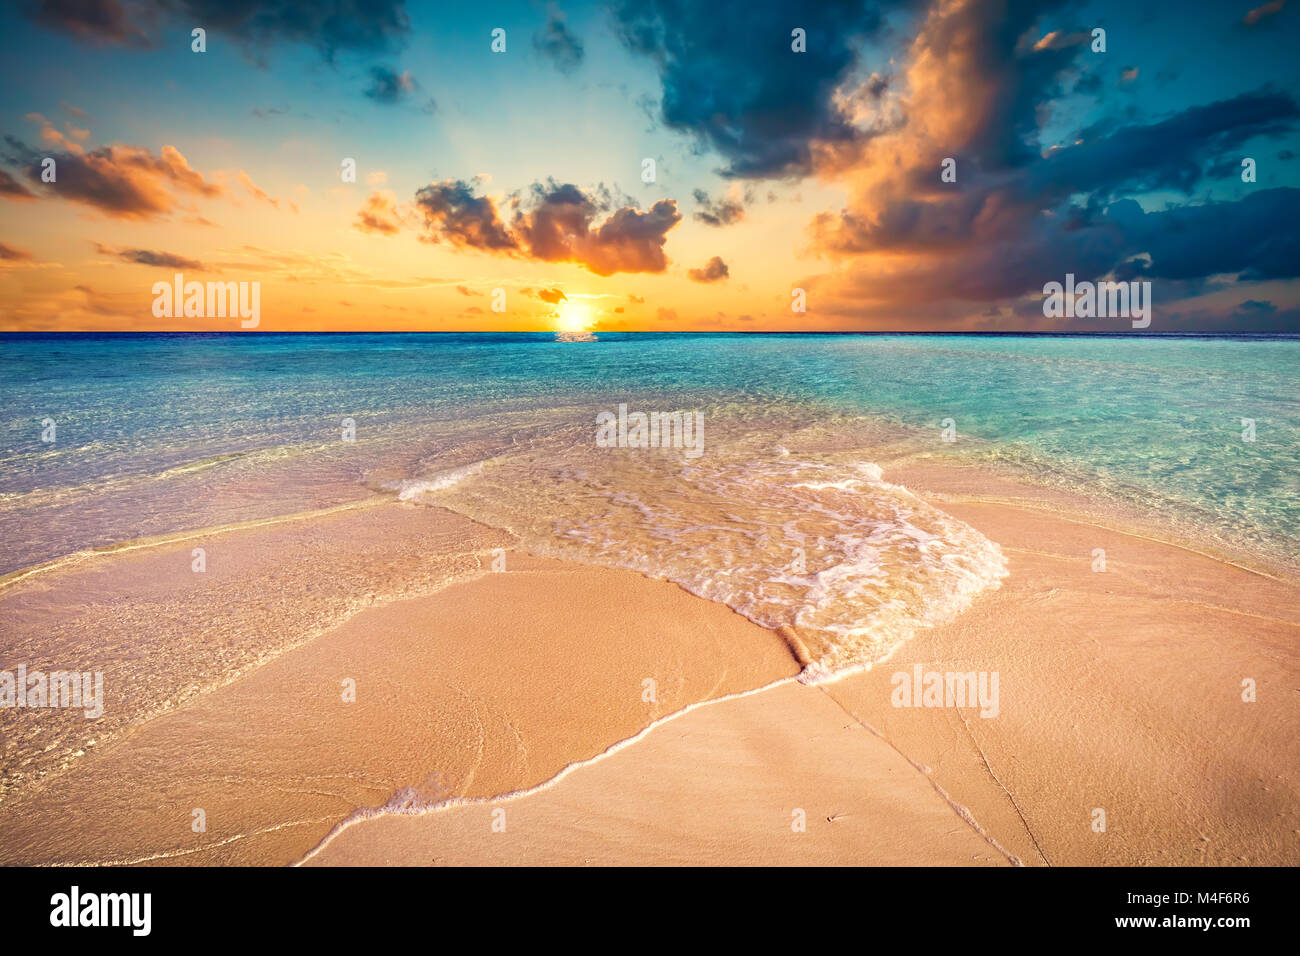 Tropical beach with white sand and clear turquoise ocean. Maldives Stock Photo